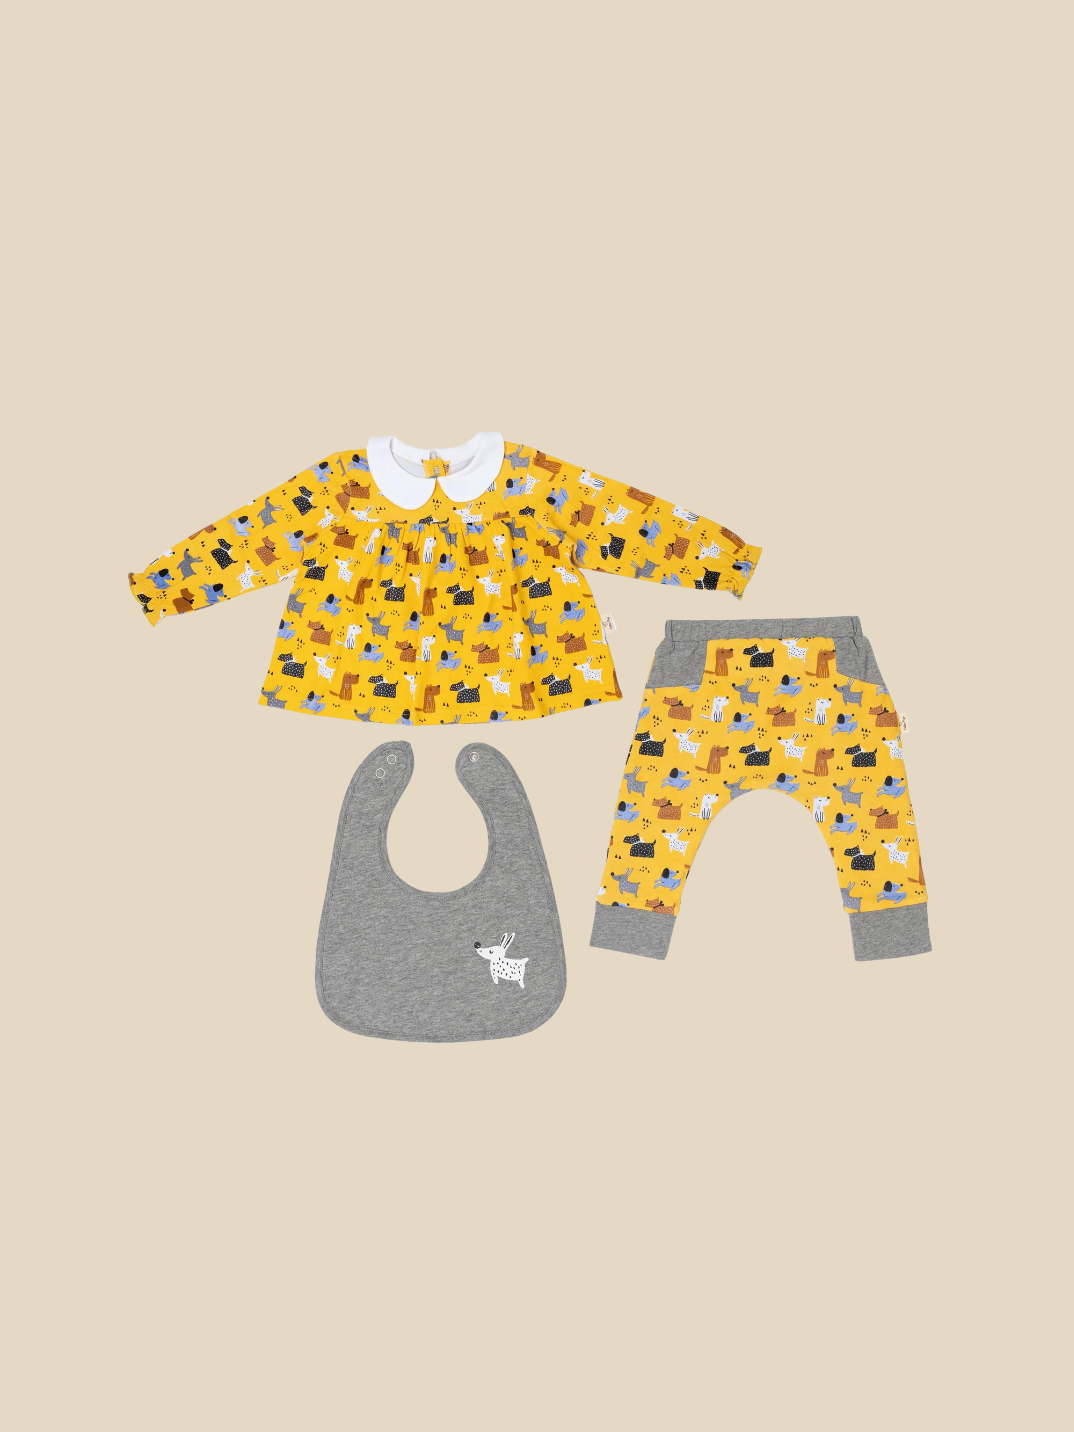 Our sweet teatime blouse with a cute peter pan collar and matching reversible pants with bib will delight you and your baby. Super-soft with puffy sleeves and an easy-to-wear design with snaps designed at the back of the blouse. Shop now.